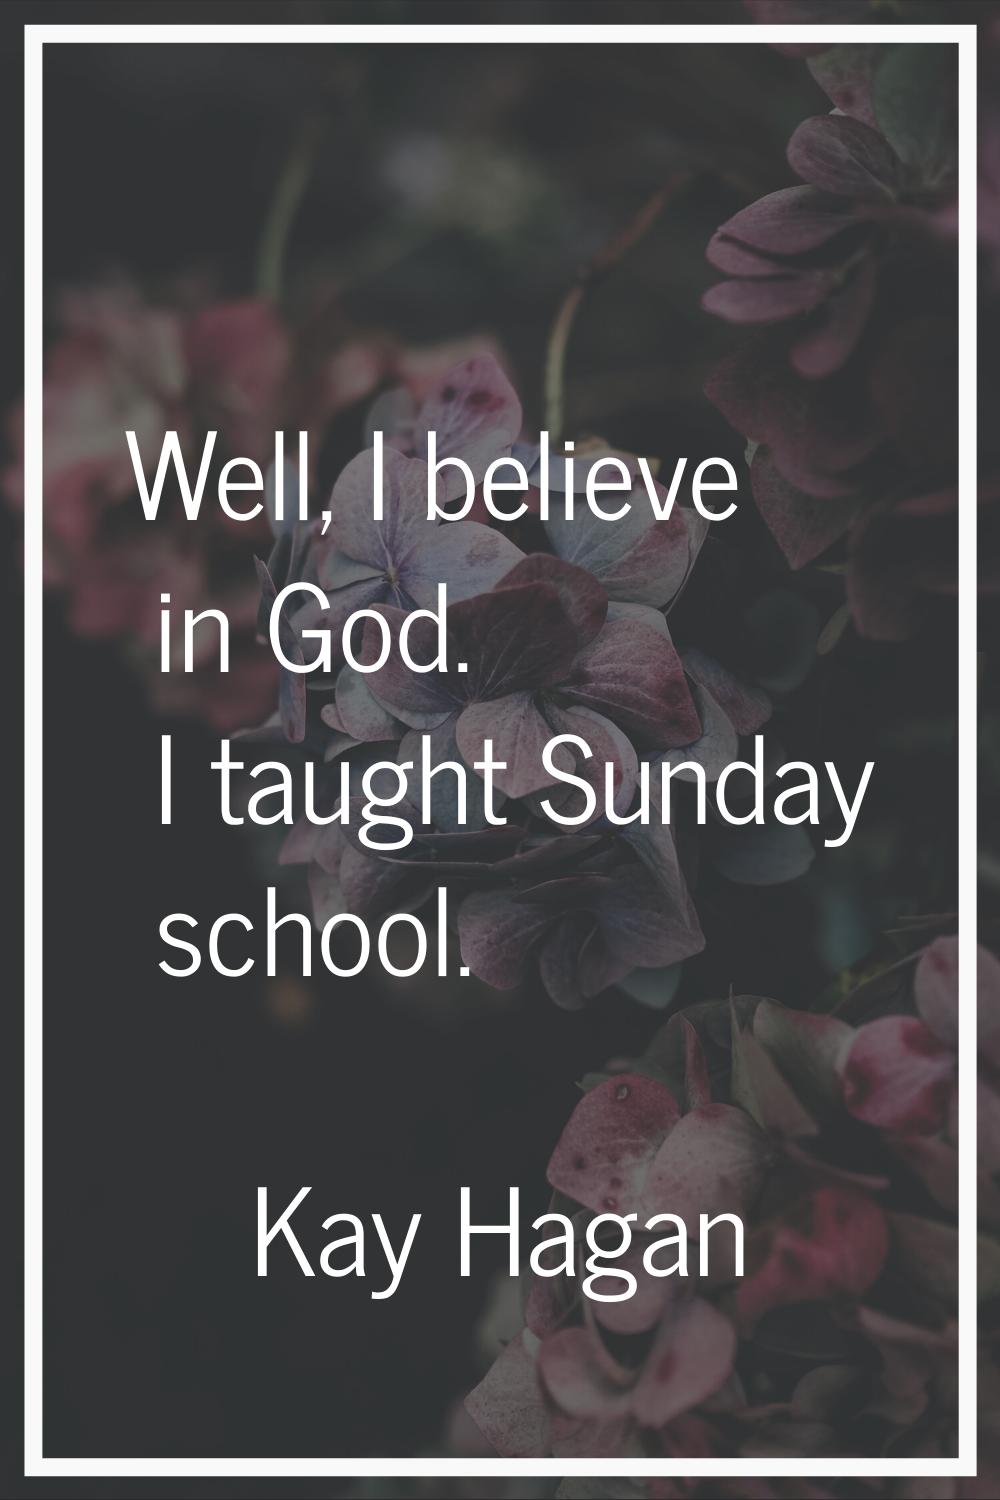 Well, I believe in God. I taught Sunday school.